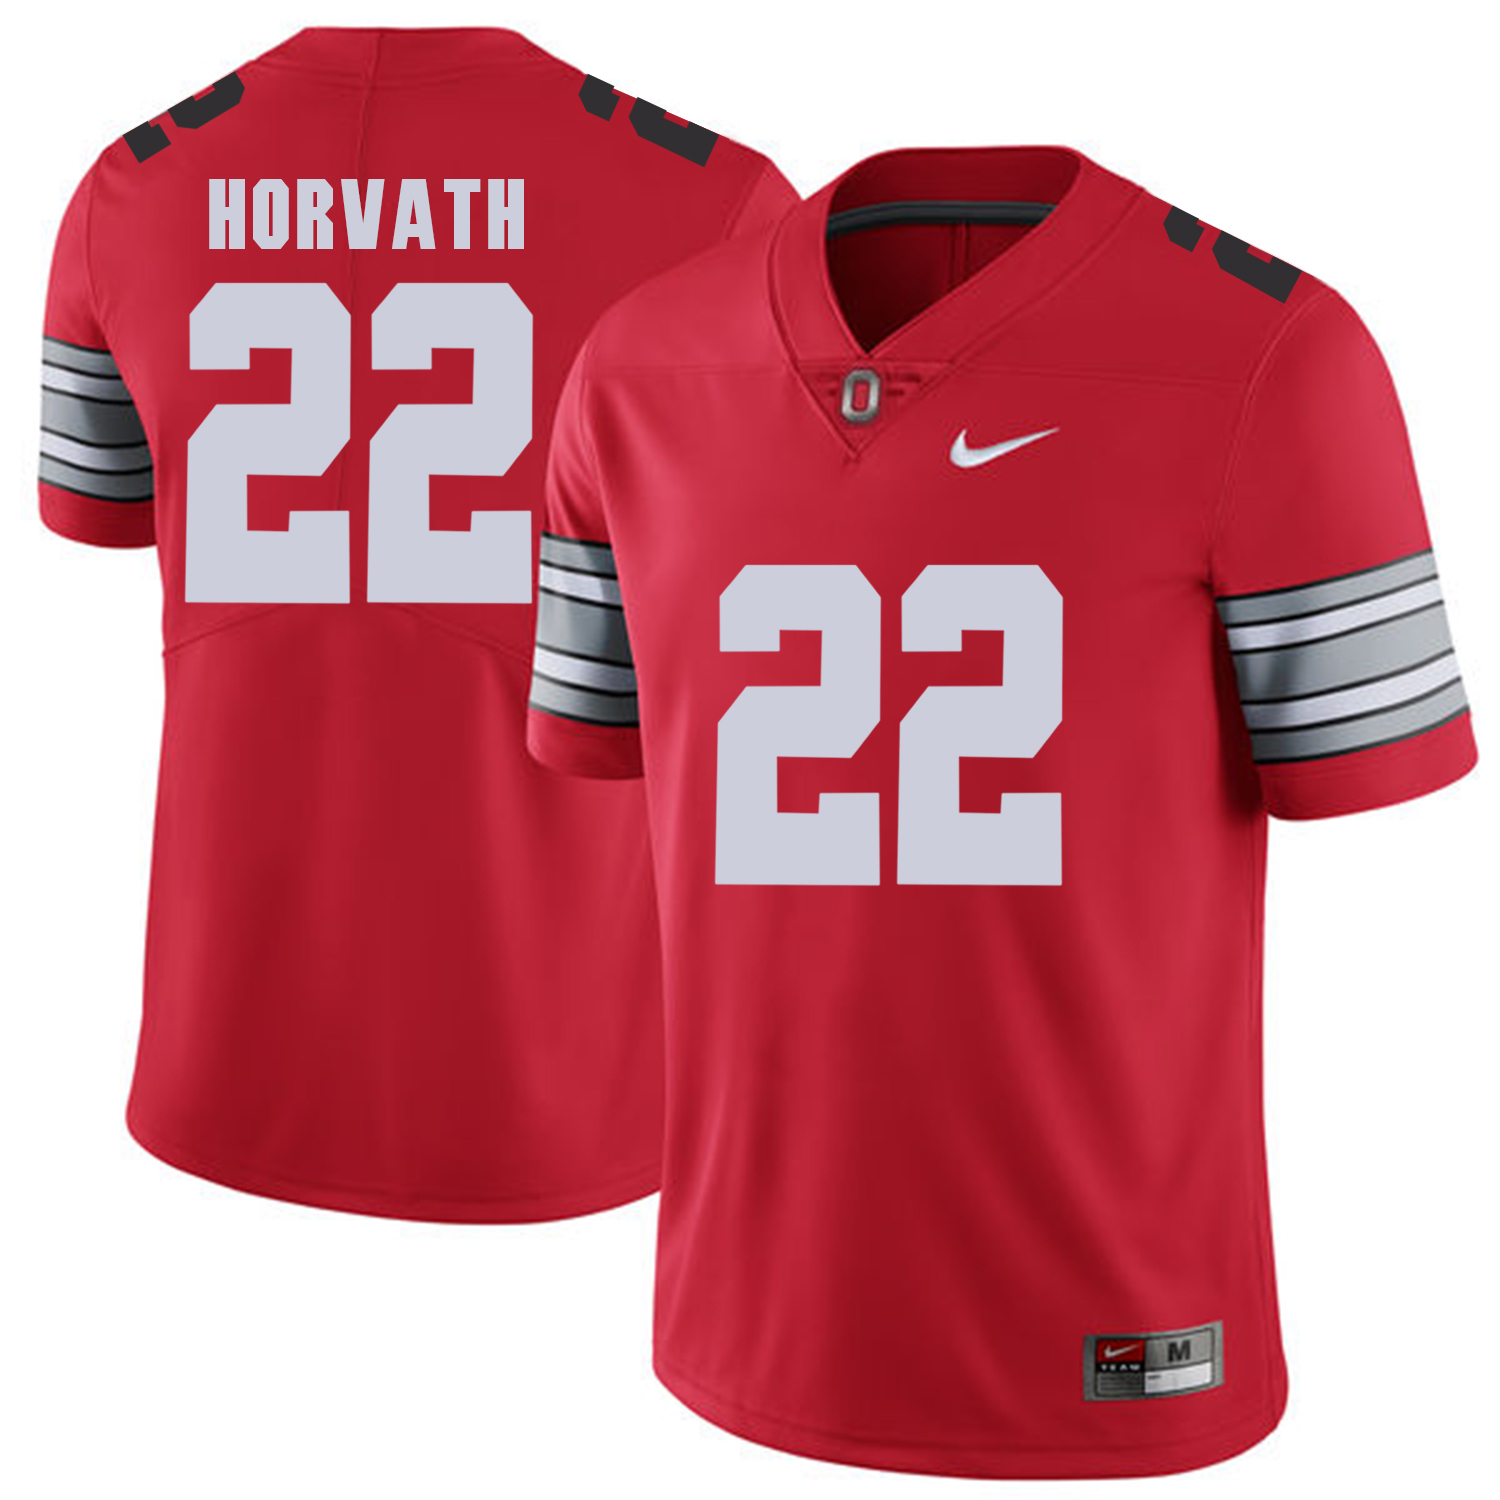 Men Ohio State 22 Horvath Red Customized NCAA Jerseys